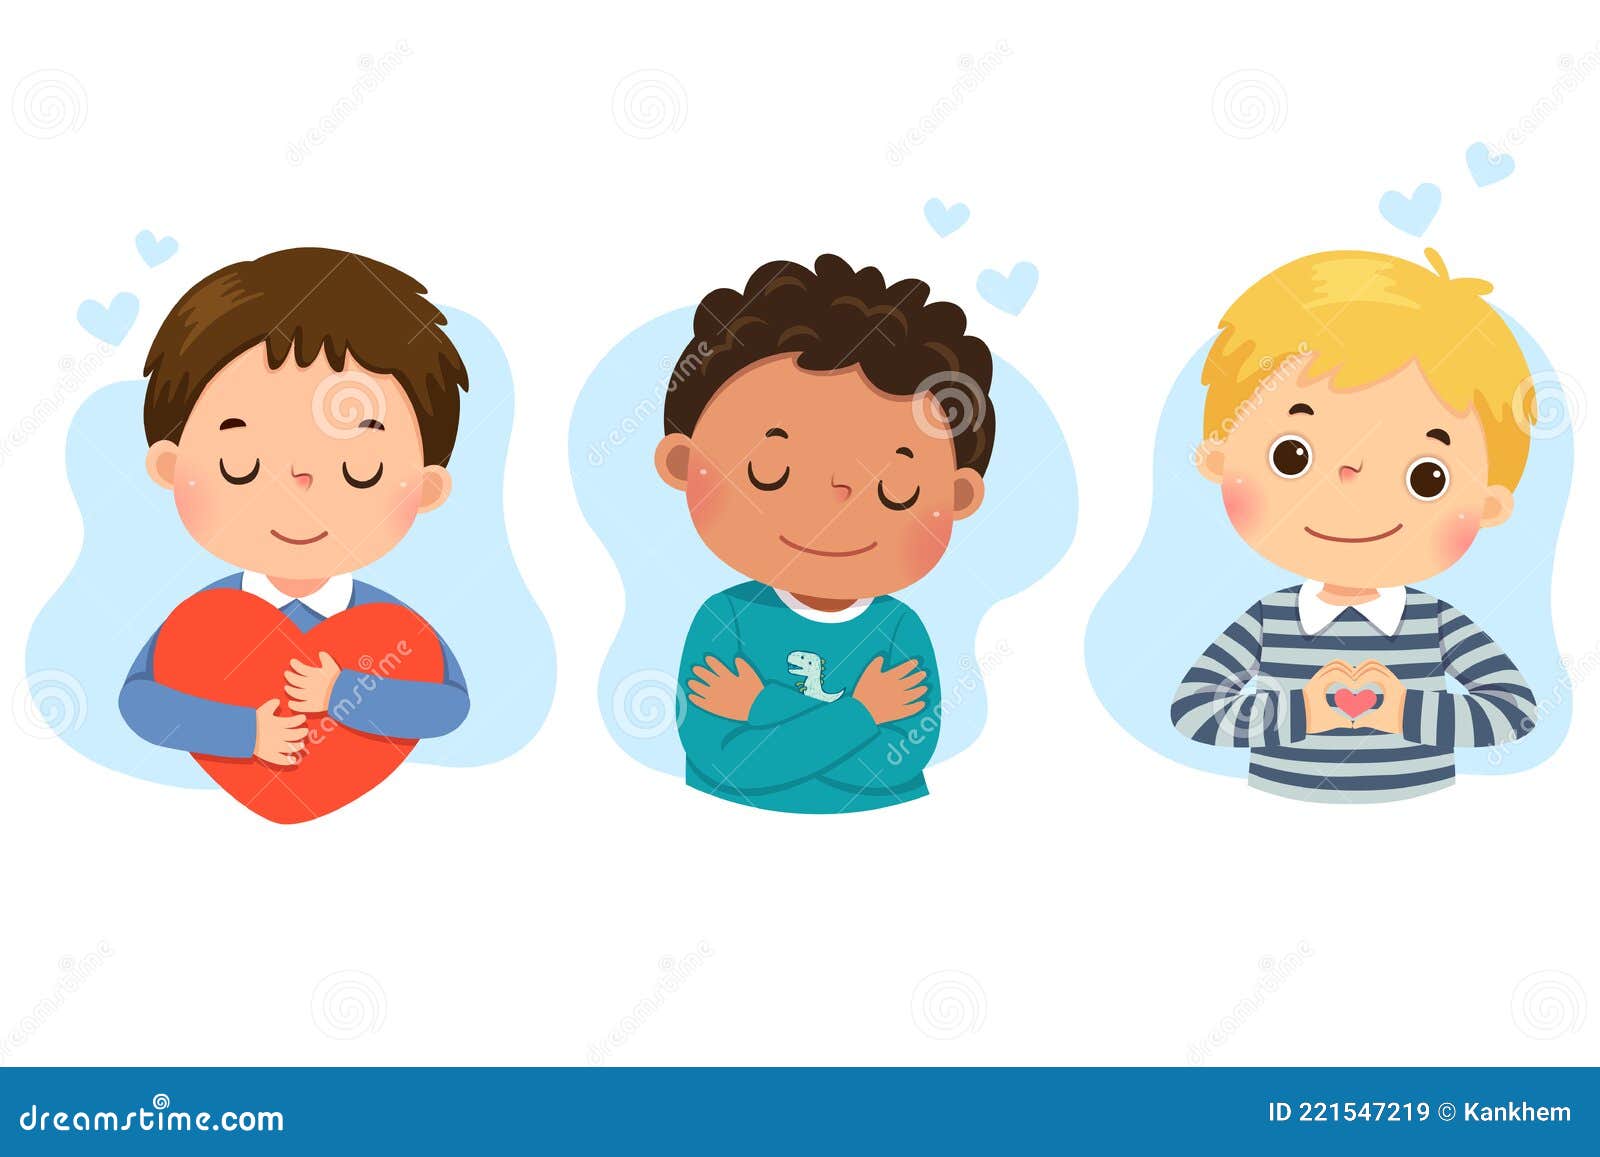 set of cartoon of little boys hugging themself. self love, self care, positive, happiness concept